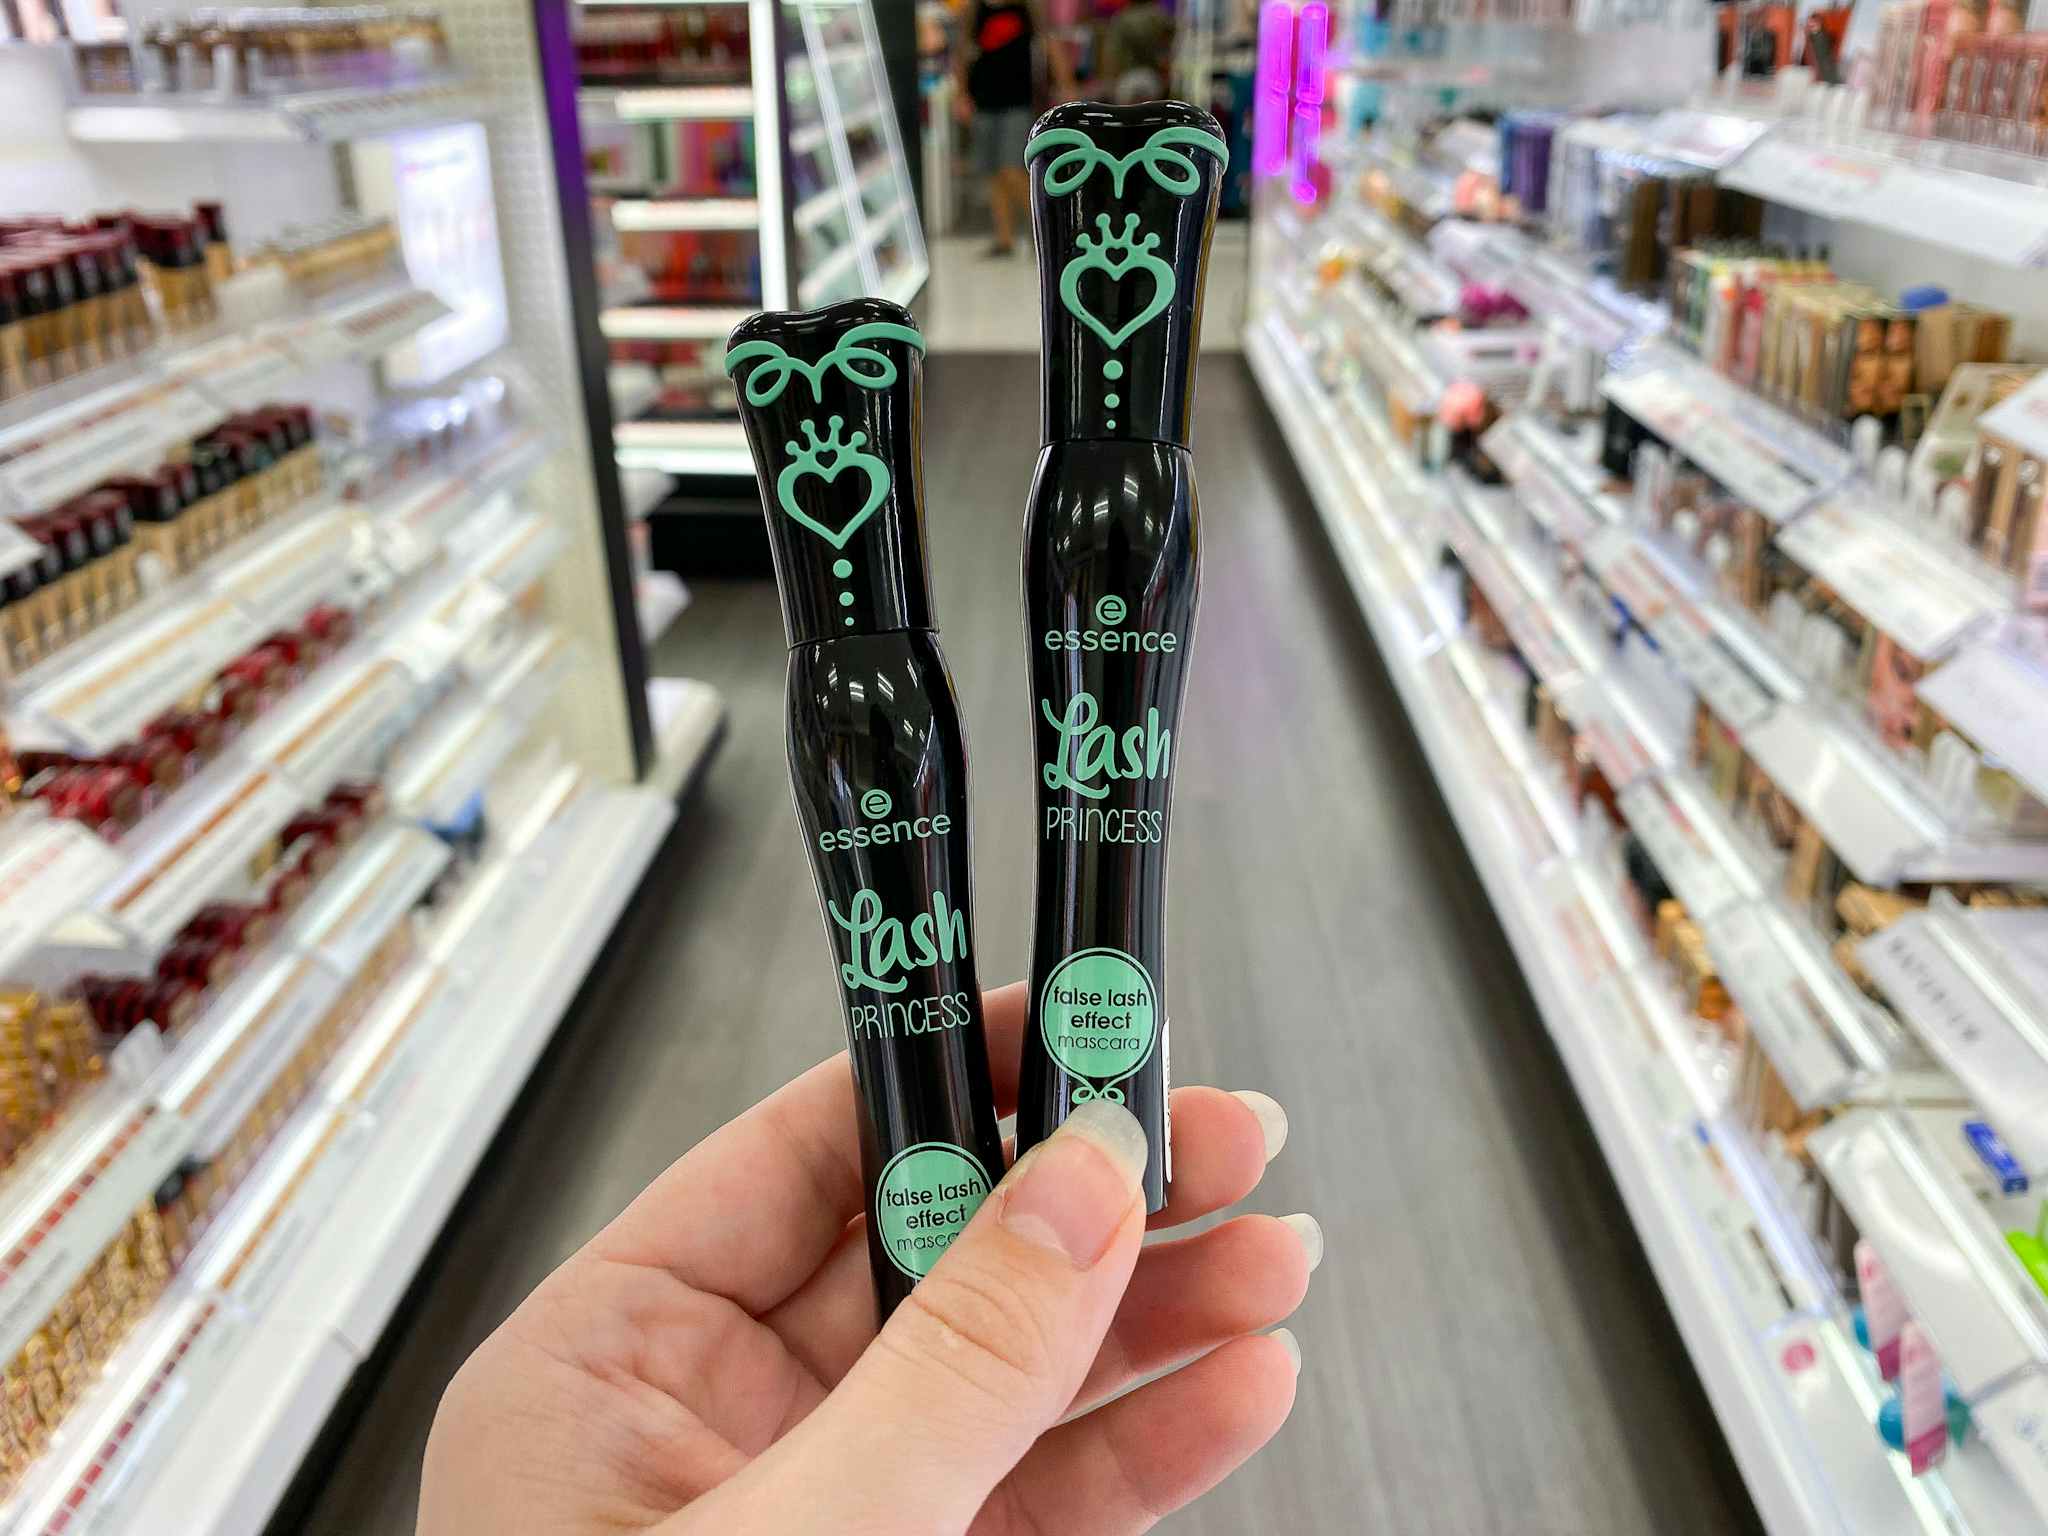 A person's hand holding up two essence Lash Princess False Lash Effect Mascaras in the beauty aisle at Target.